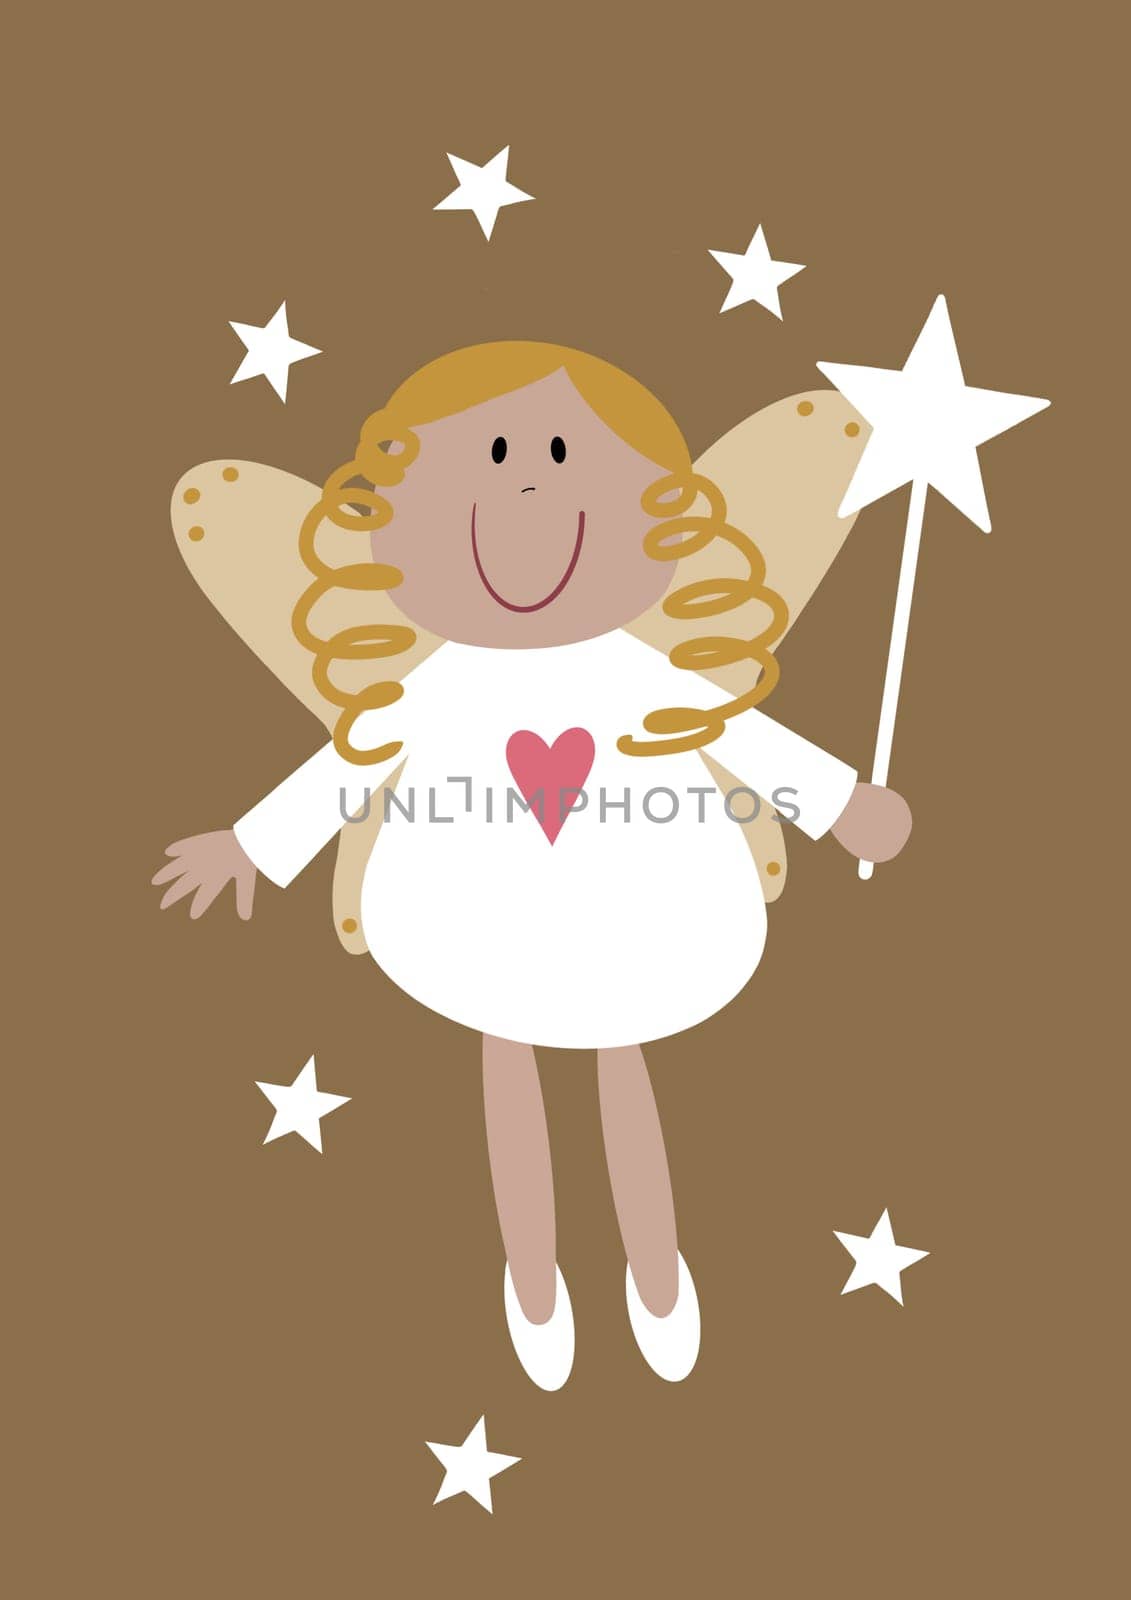 Cute fairy illustration in a quirky cartoon style. This rustic folk art fairy  is surrounded by sparkling stars. She has a magic wand and a heart motif on her dress. A perfect Christmas tree topper or birthday fairy design.